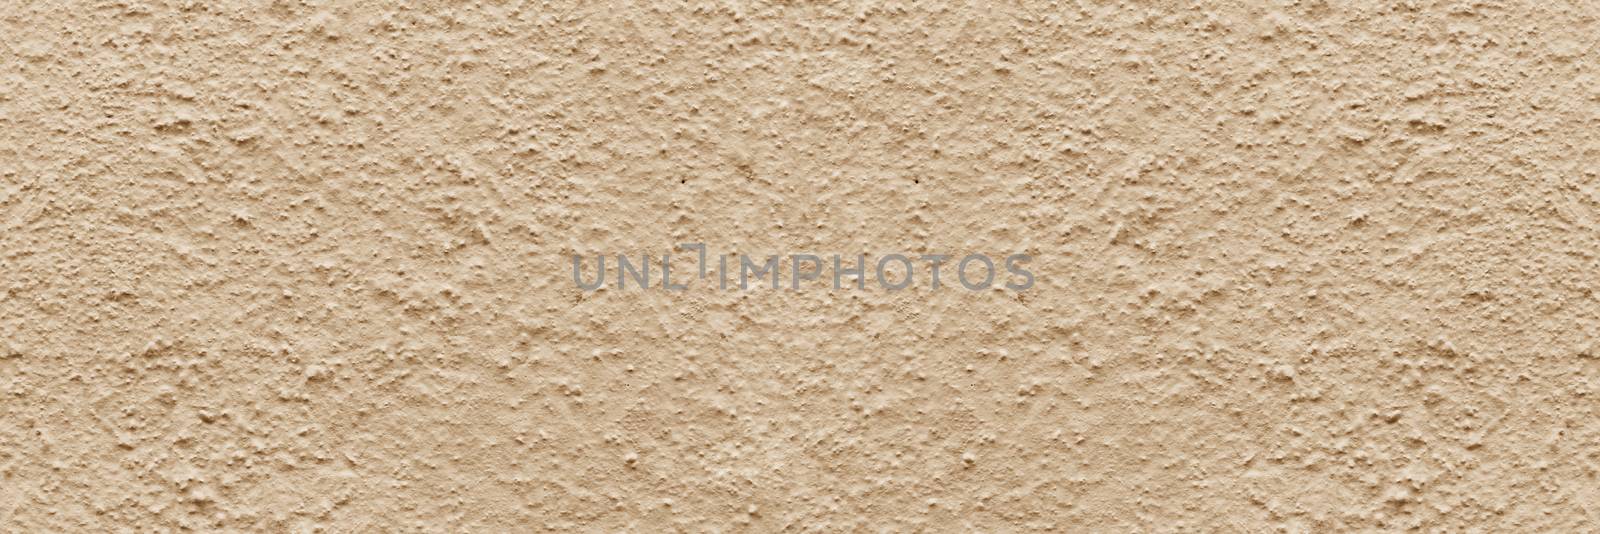 Panorama beige rough textured concrete background. copy space, text box, background for lettering, background for calligraphy.